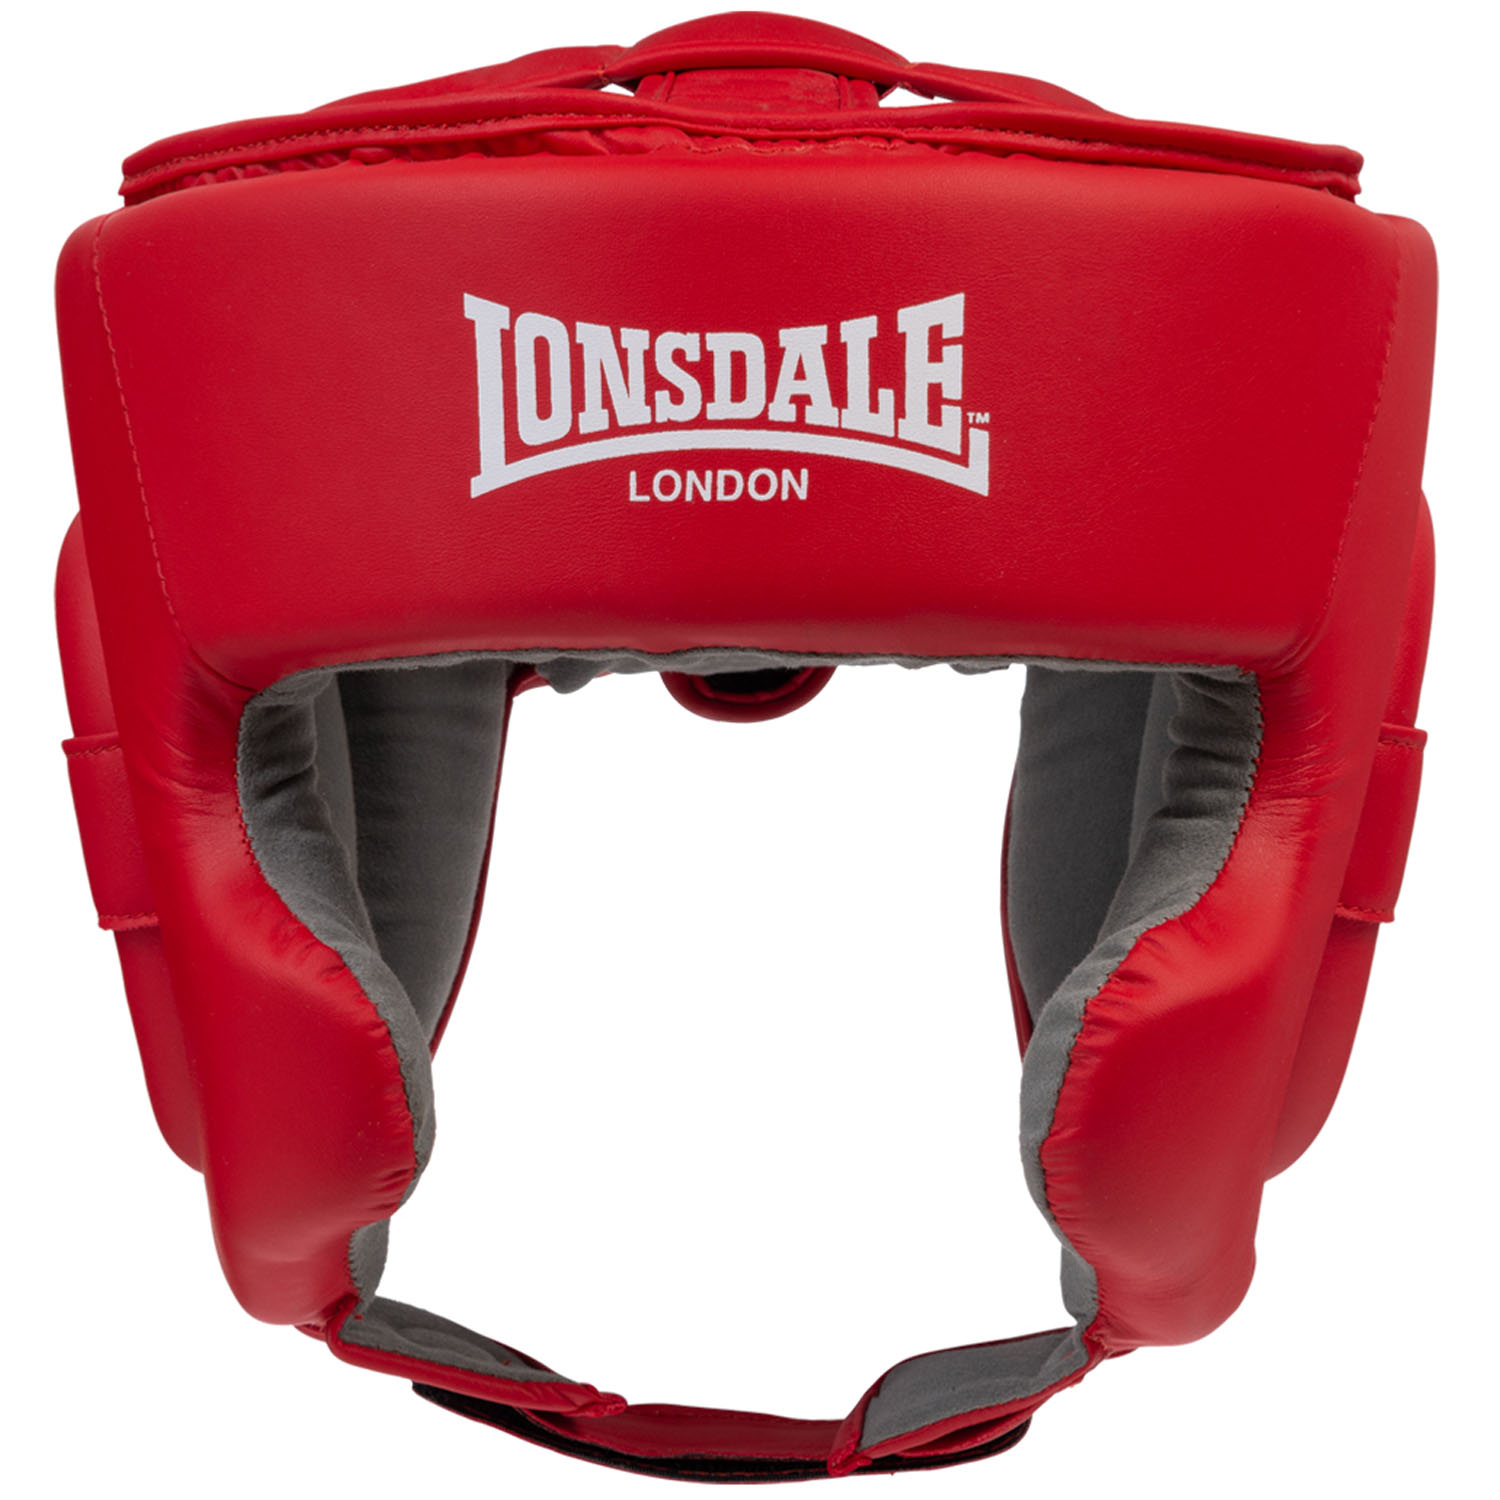 Lonsdale Head Guard, Stanford, red, S/M